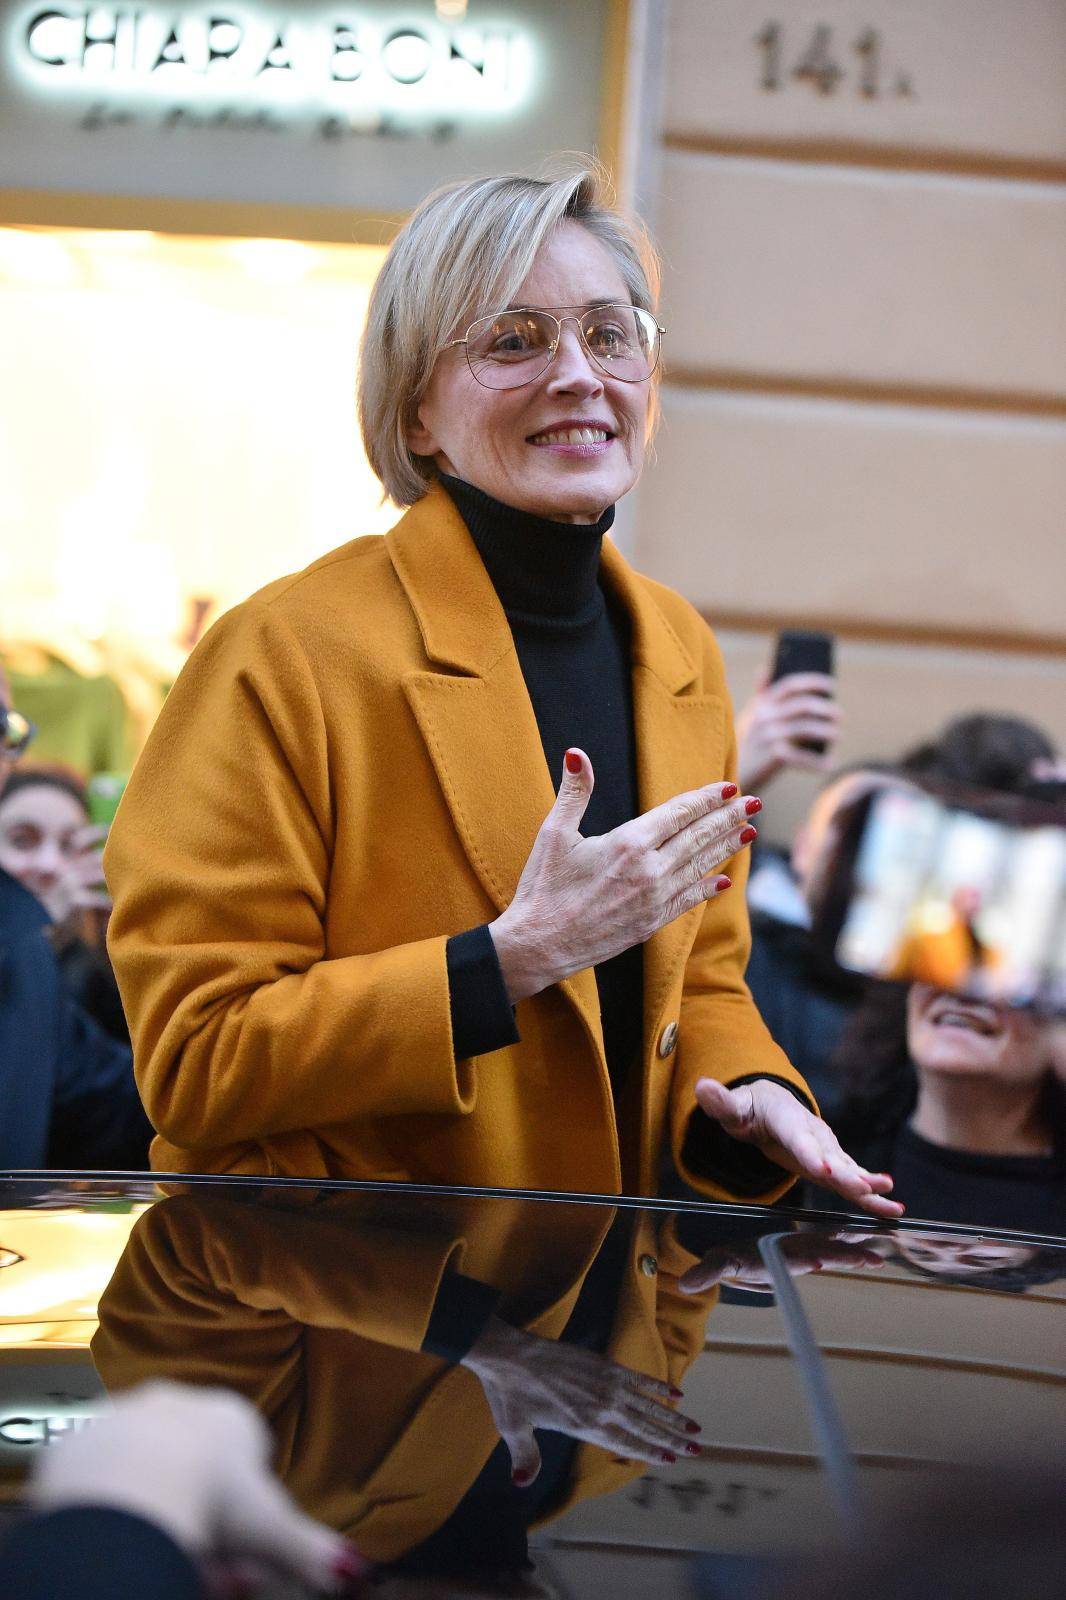 Rome, Sharon Stone makes a long shopping for the boutiques of the center granting to the numerous fans